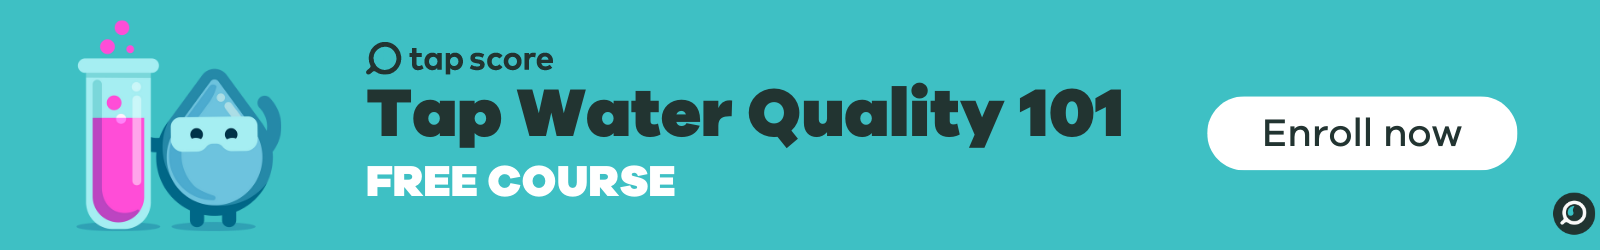 Free Tap Water Quality Course - Banner #2